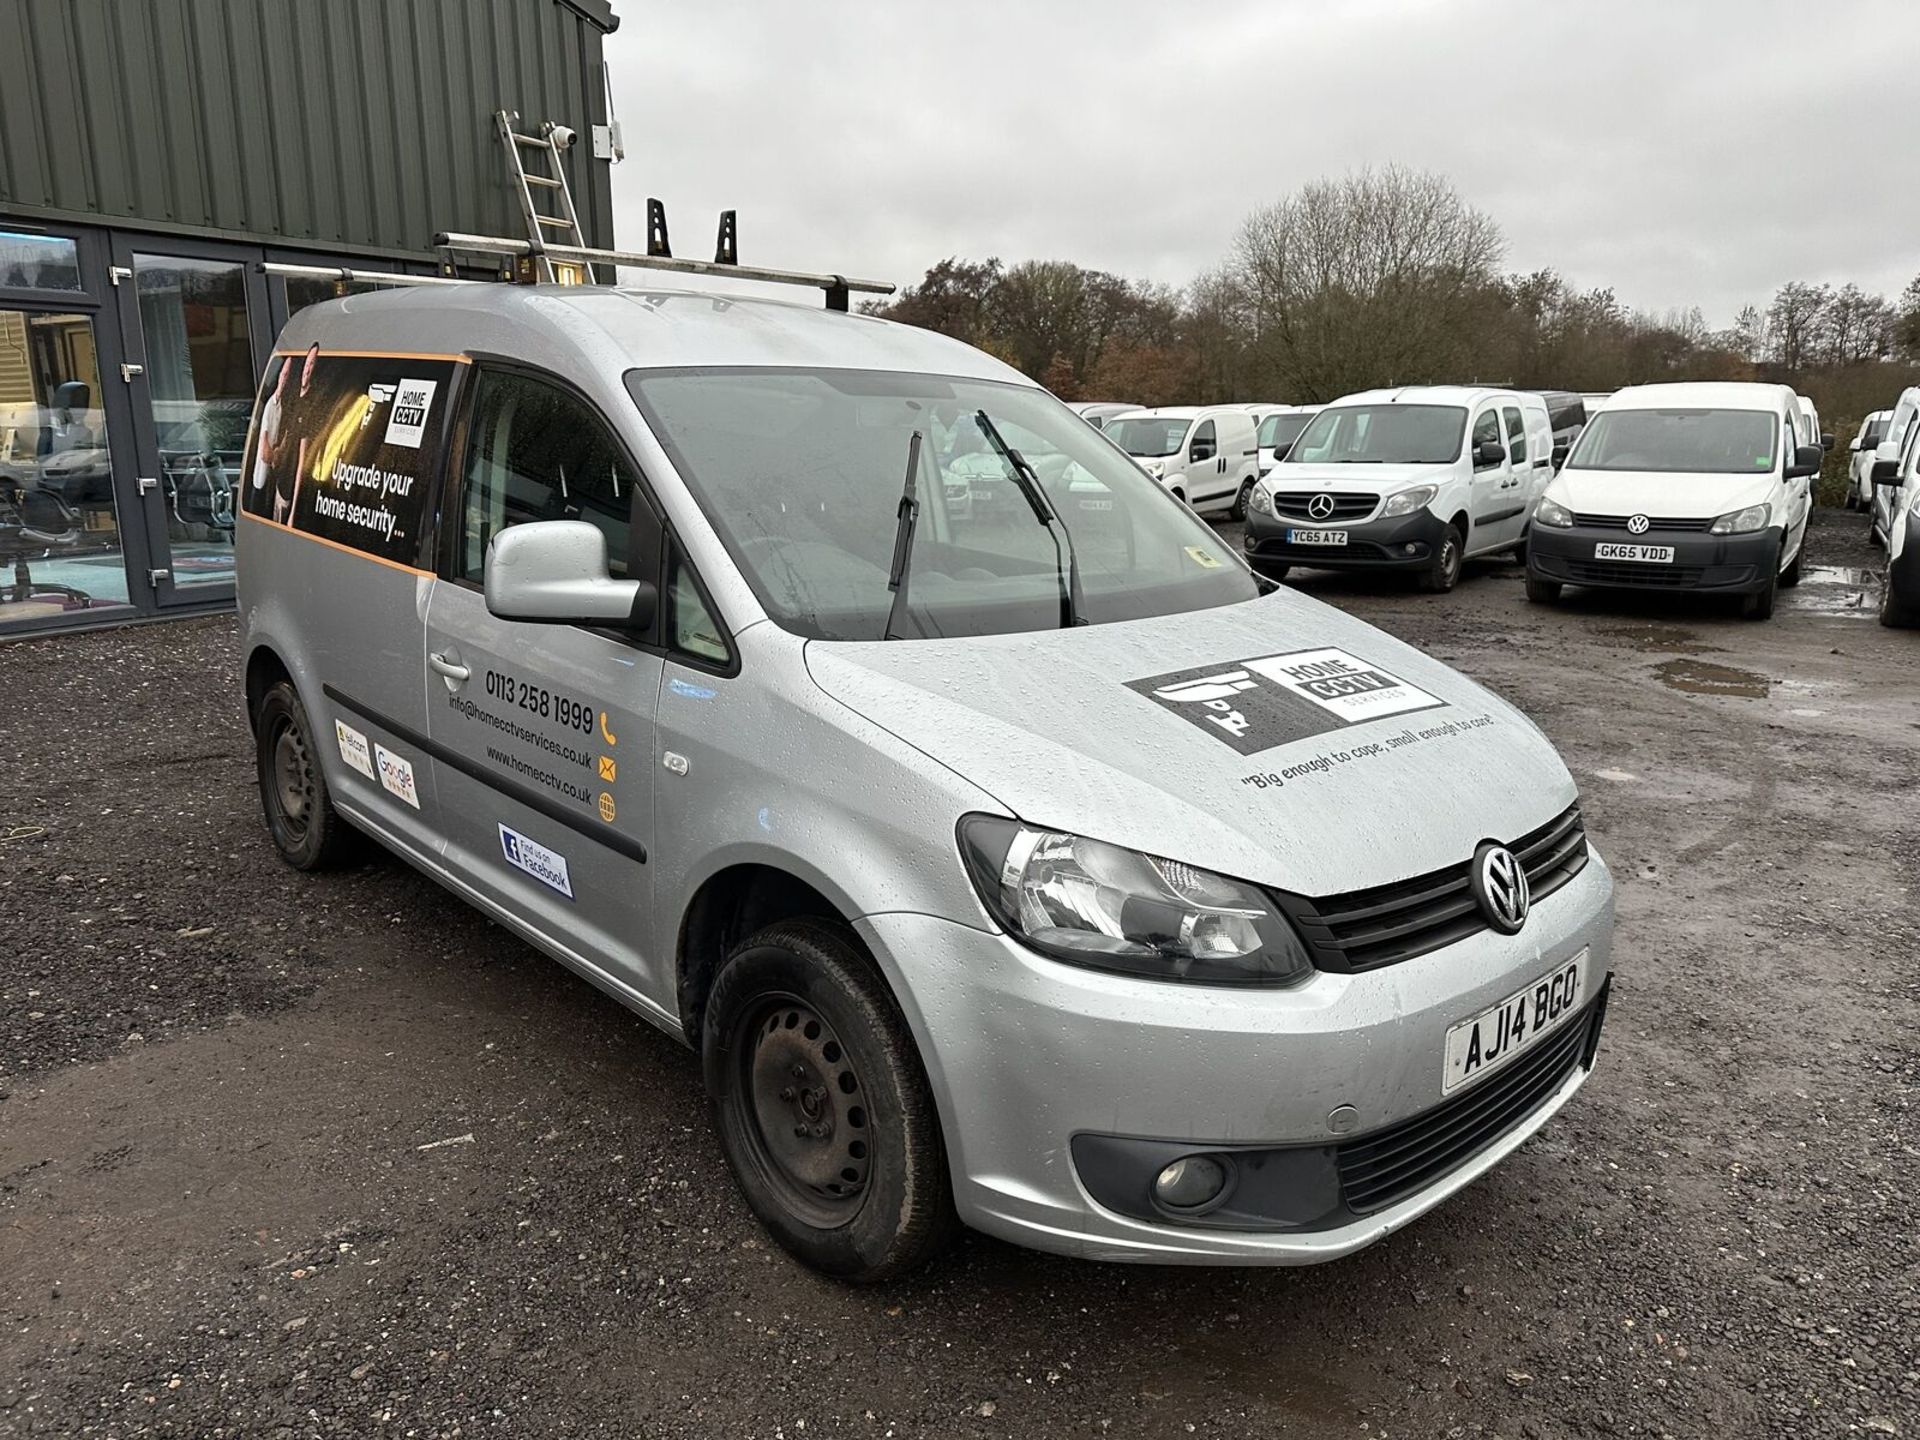 DRIVE-IN OPPORTUNITY: 2014 VW CADDY C20 HIGHLINE, FIXER UPPER >>--NO VAT ON HAMMER--<<